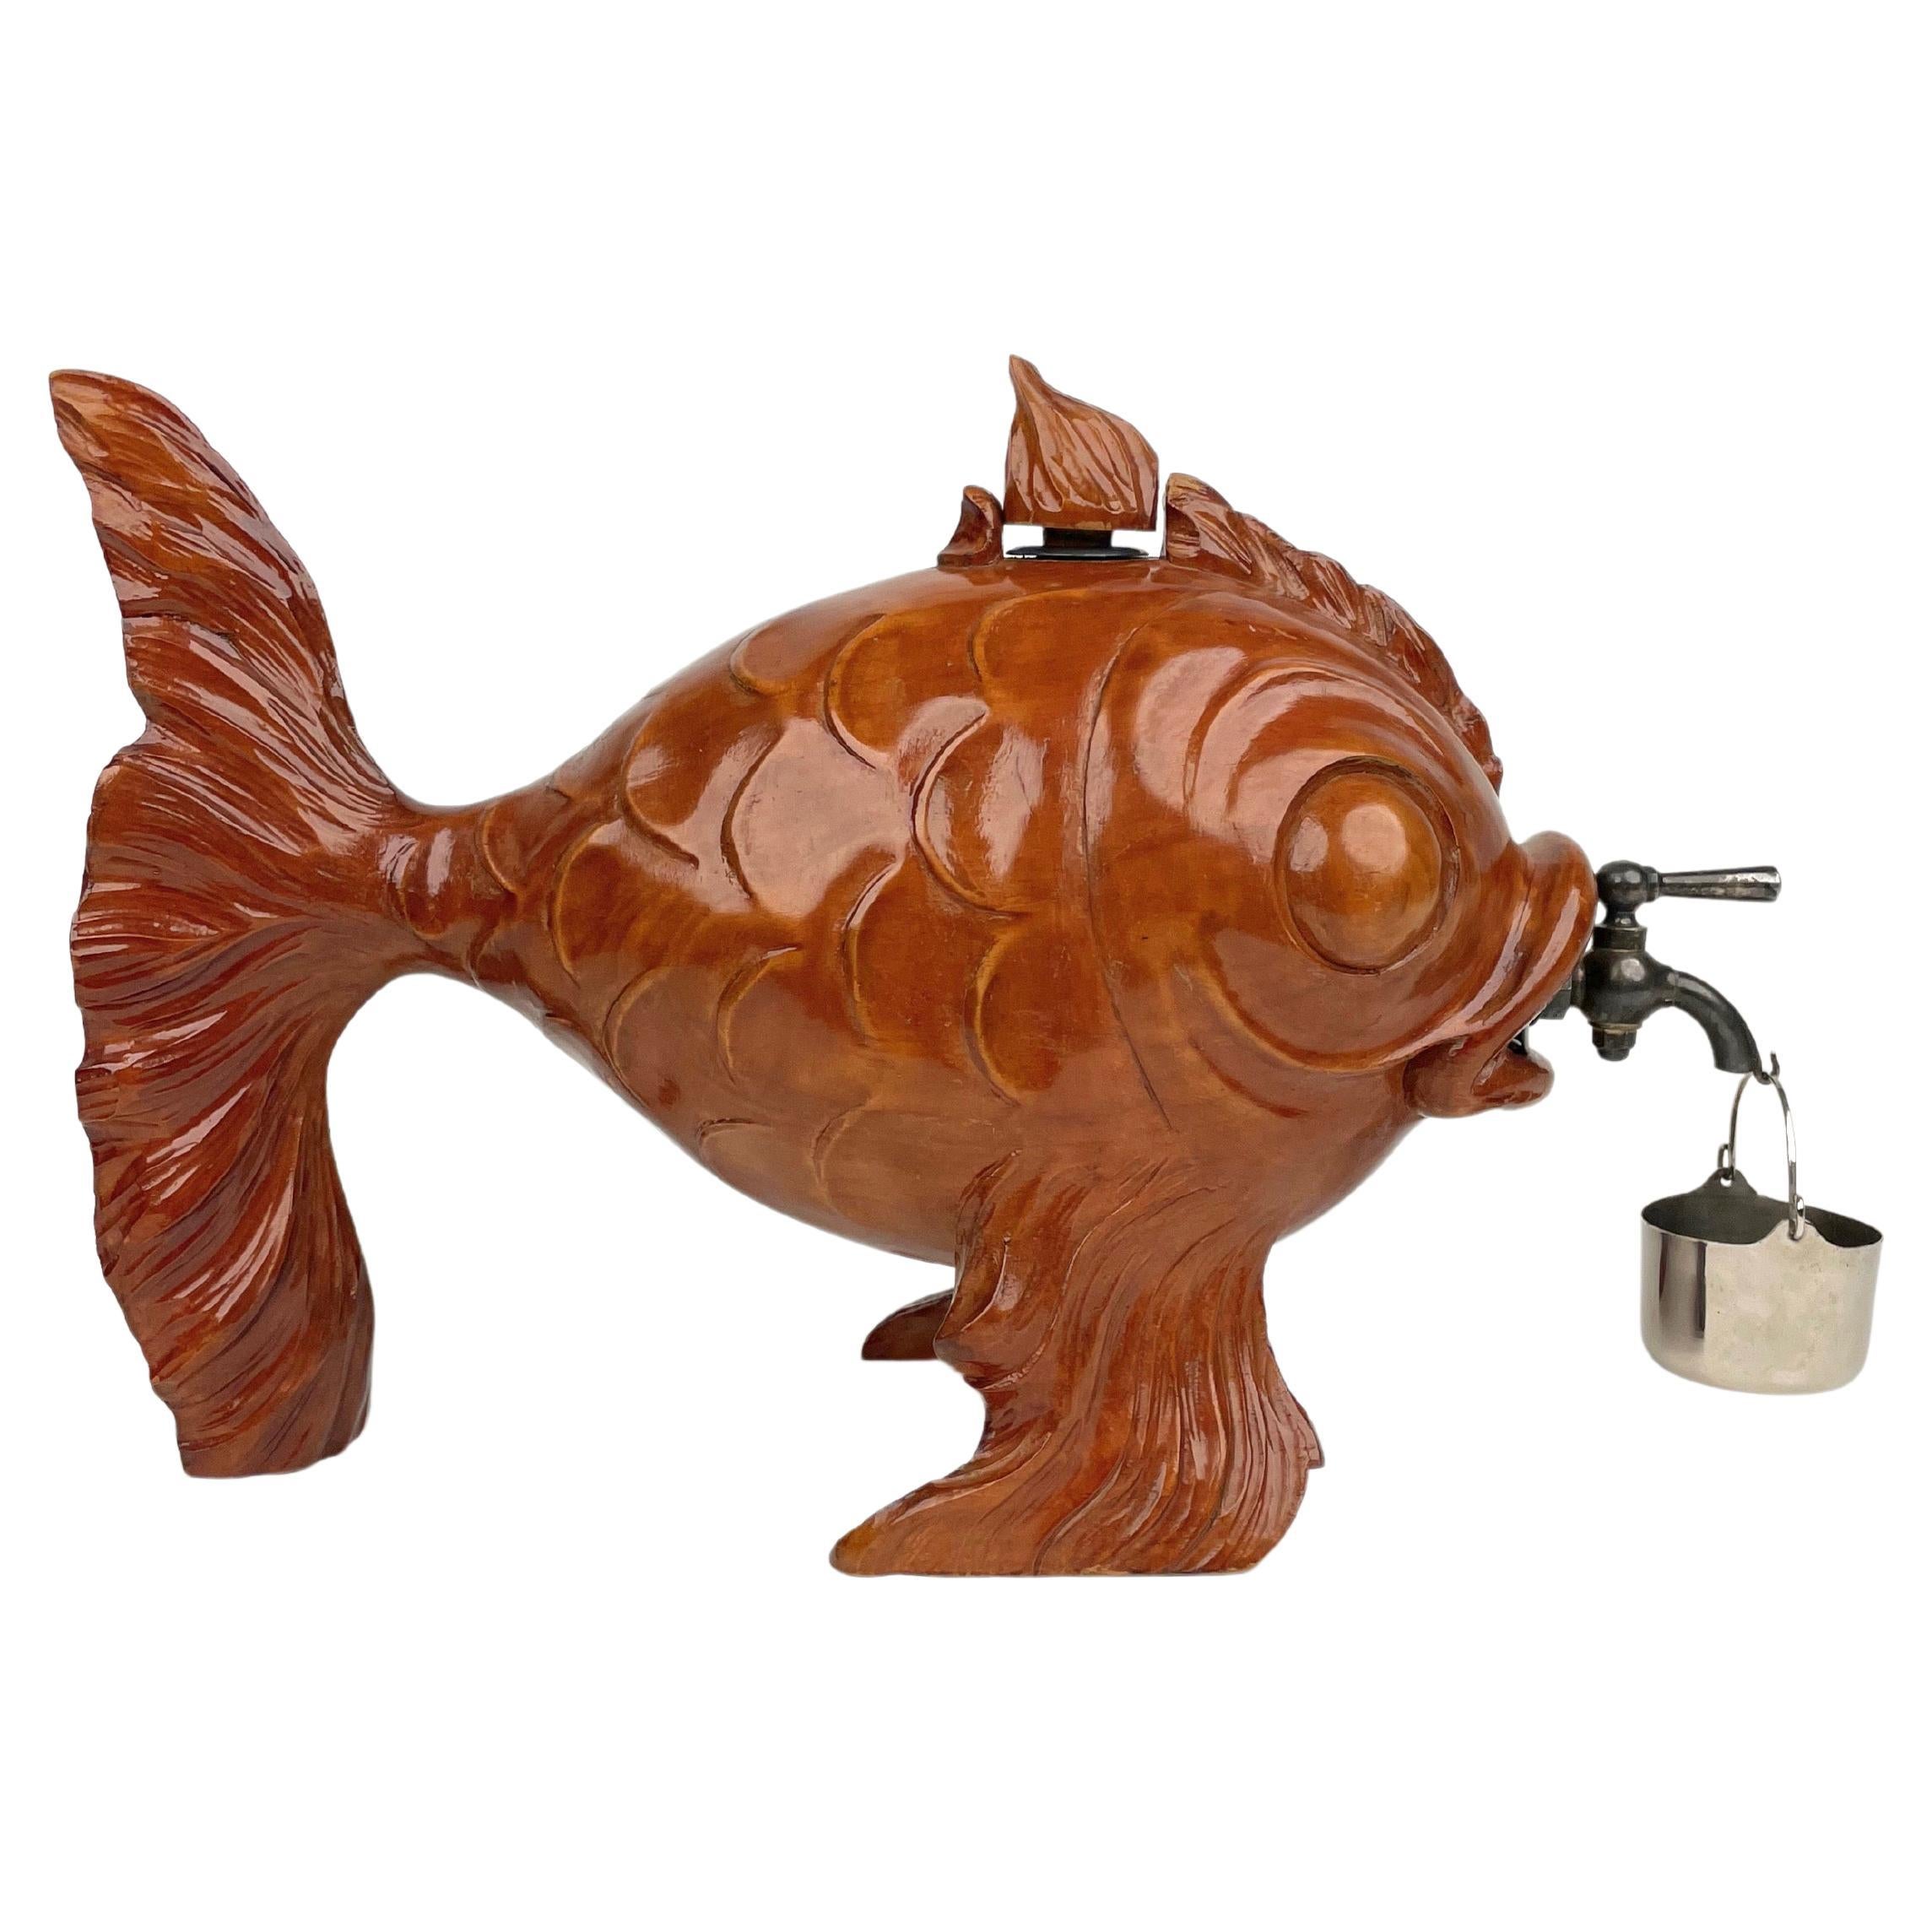 Fish Bottle Dispenser Hand Carved Wood & Metal Aldo Tura for Macabo Italy 1950s